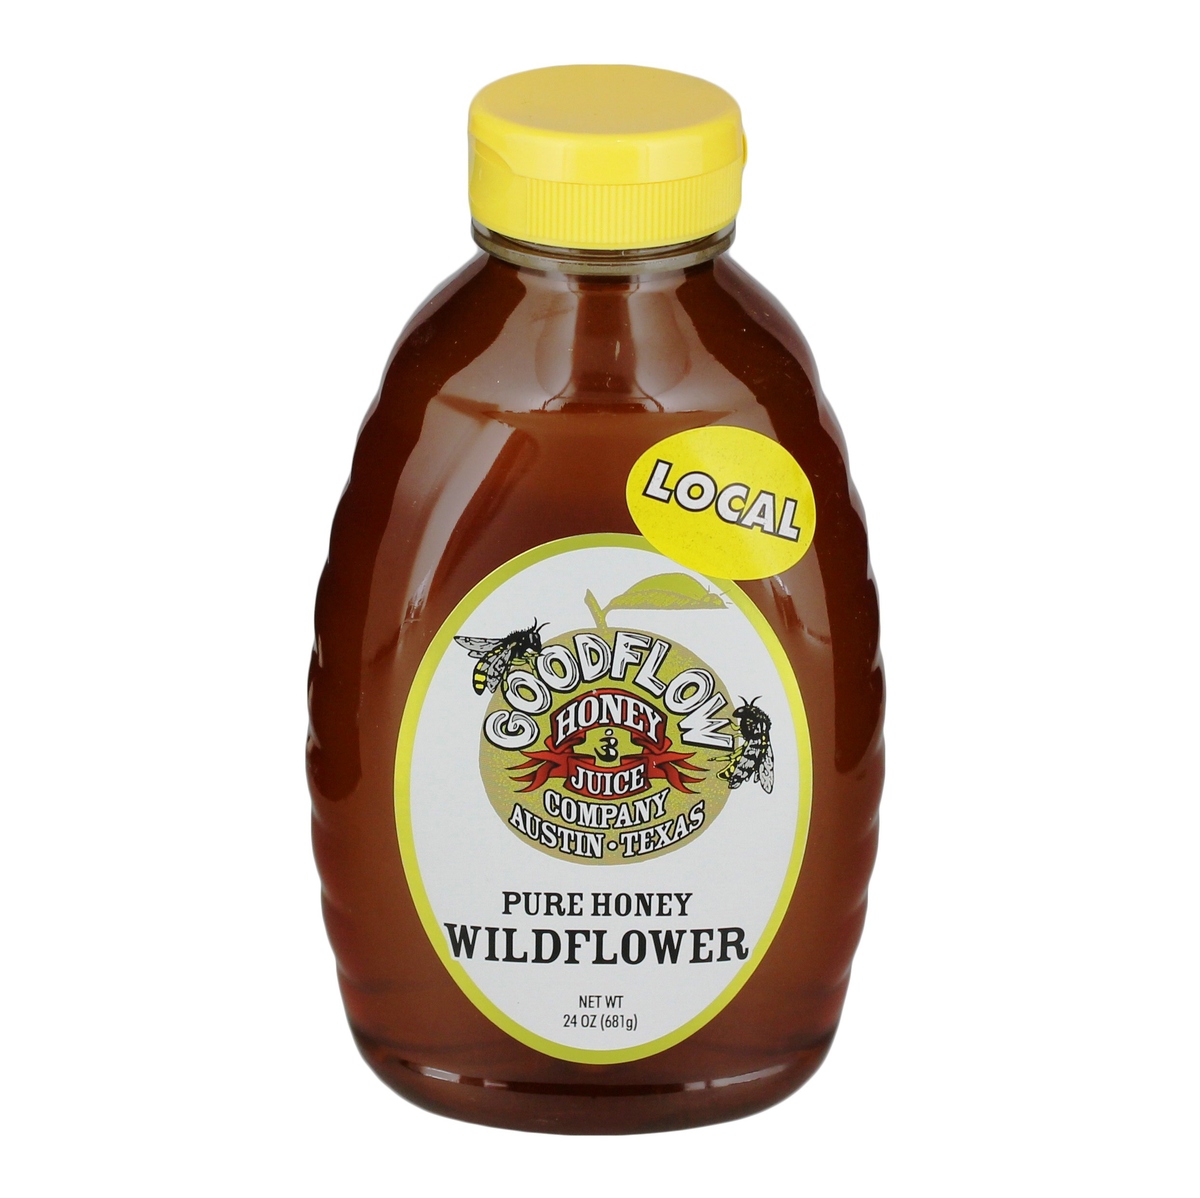 What Is Wildflower Honey Good For?